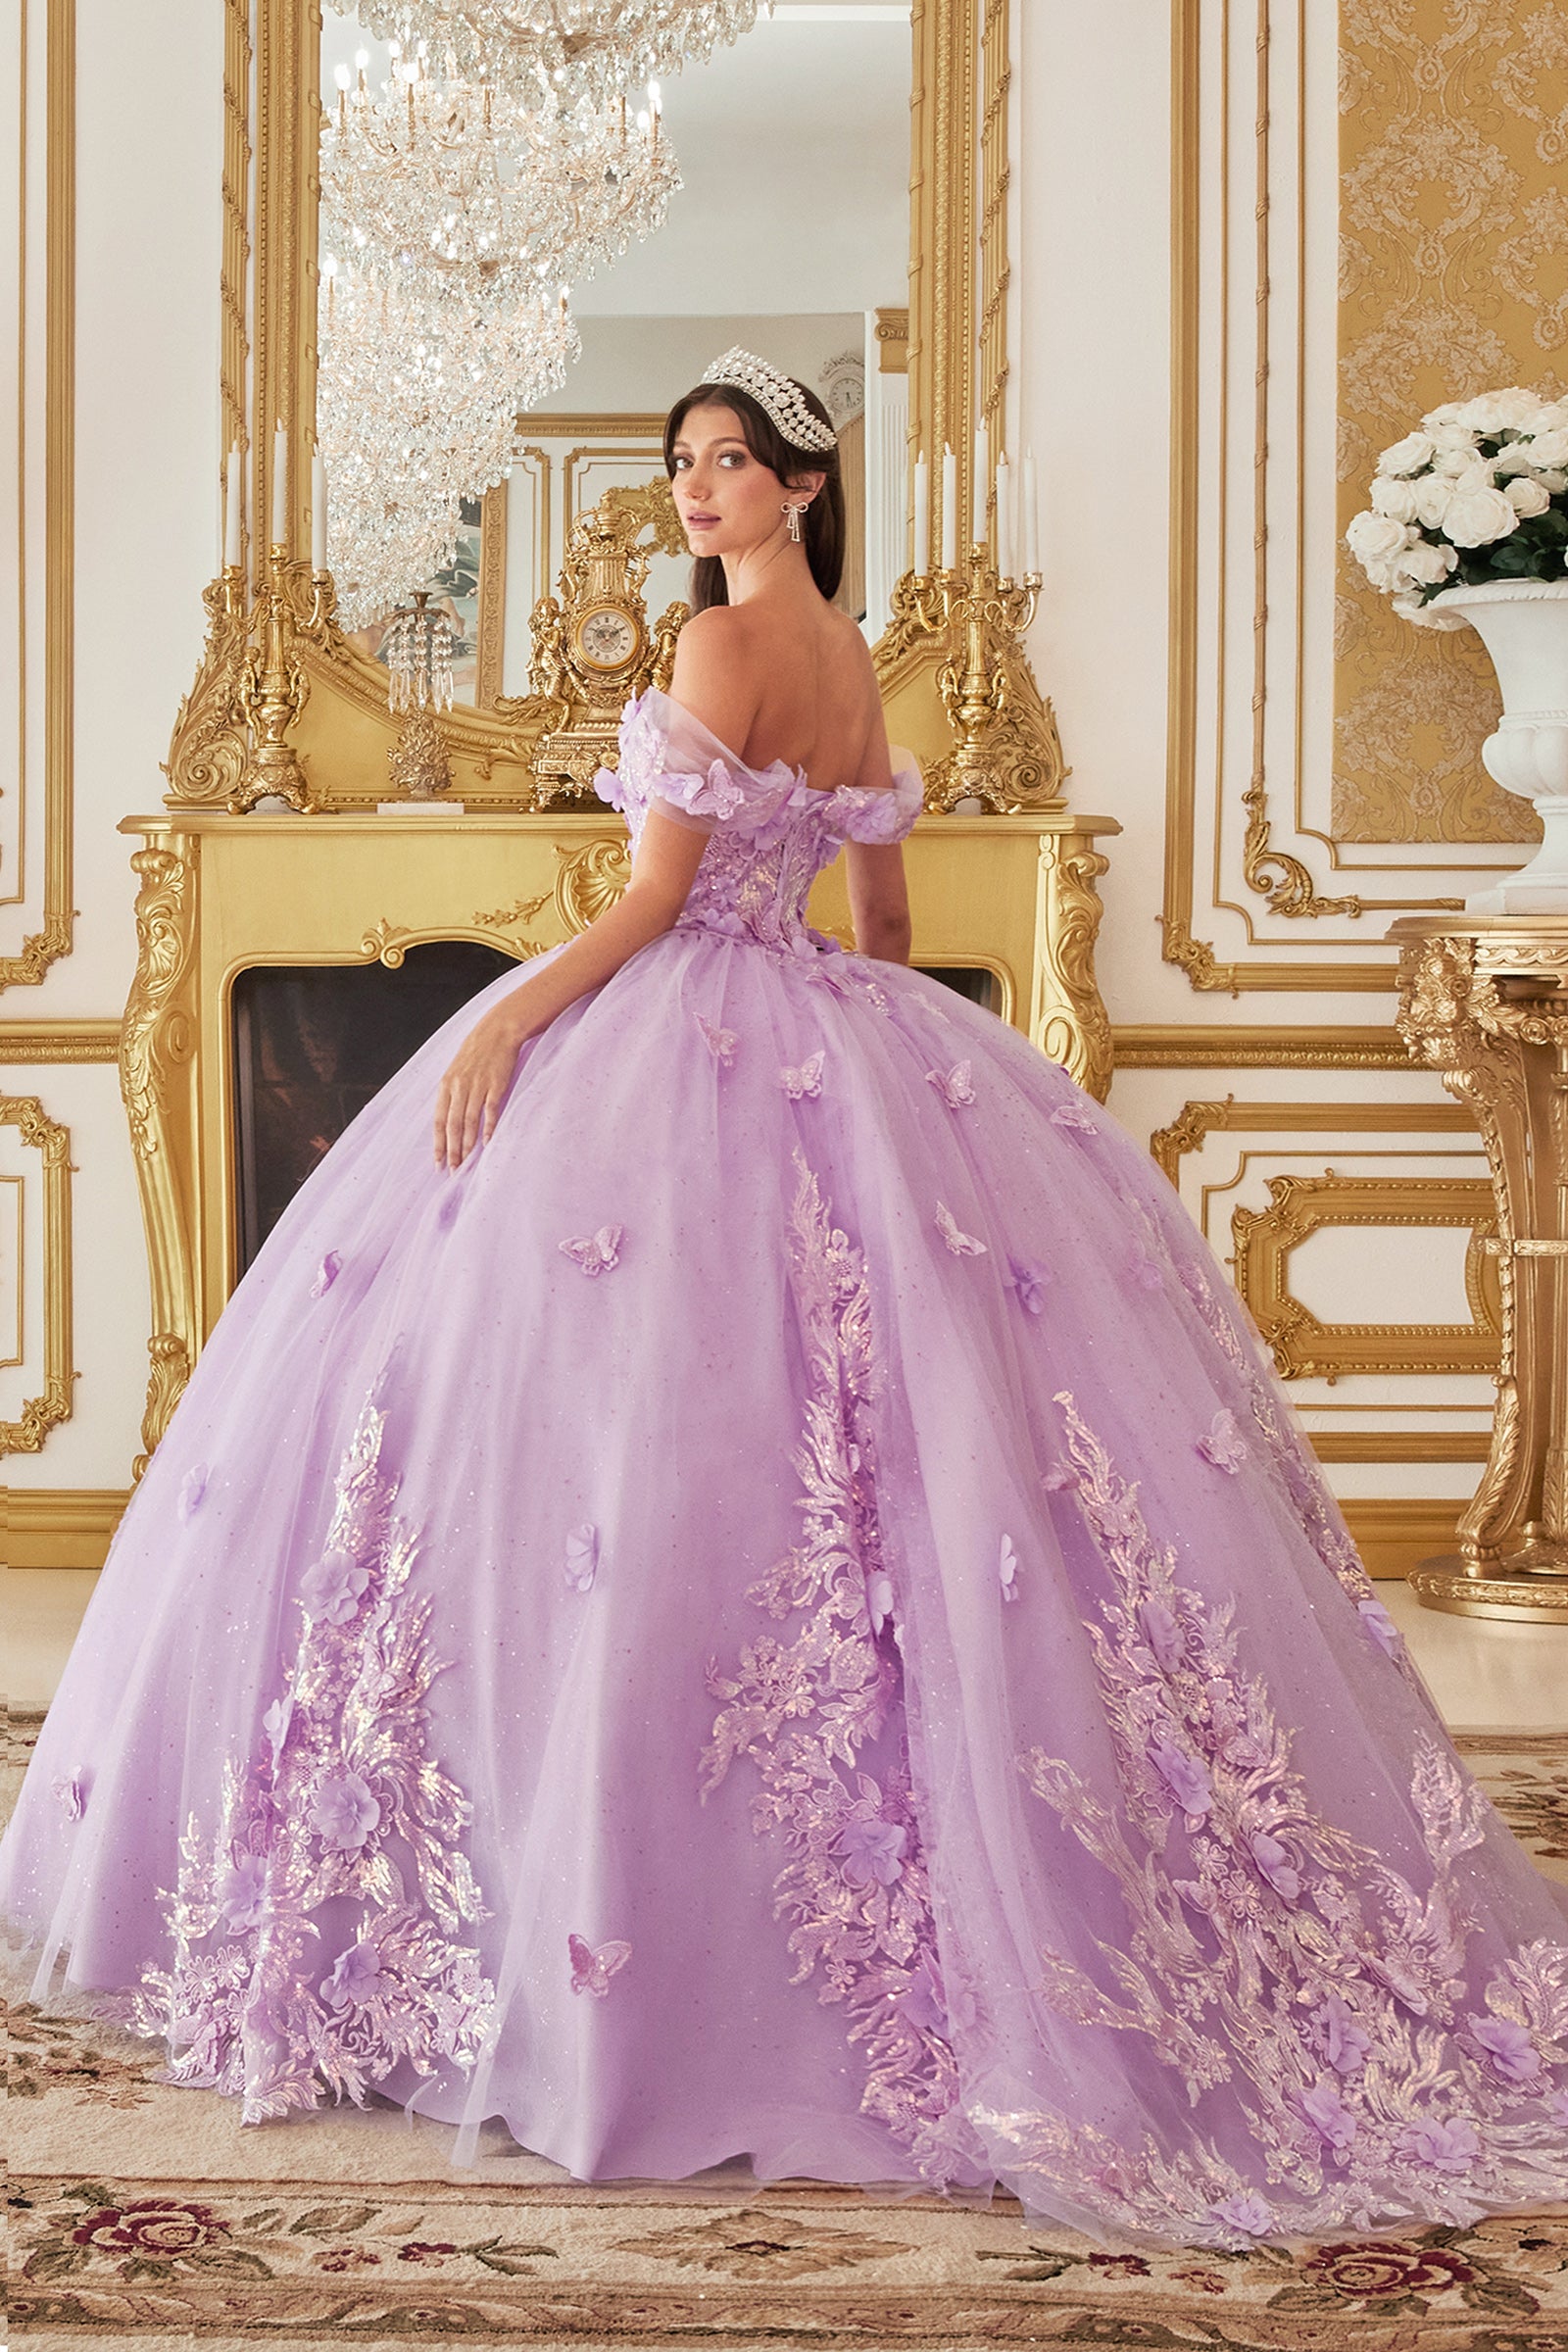 Floral Appliqued Ball Gown By Cinderella Divine -15713